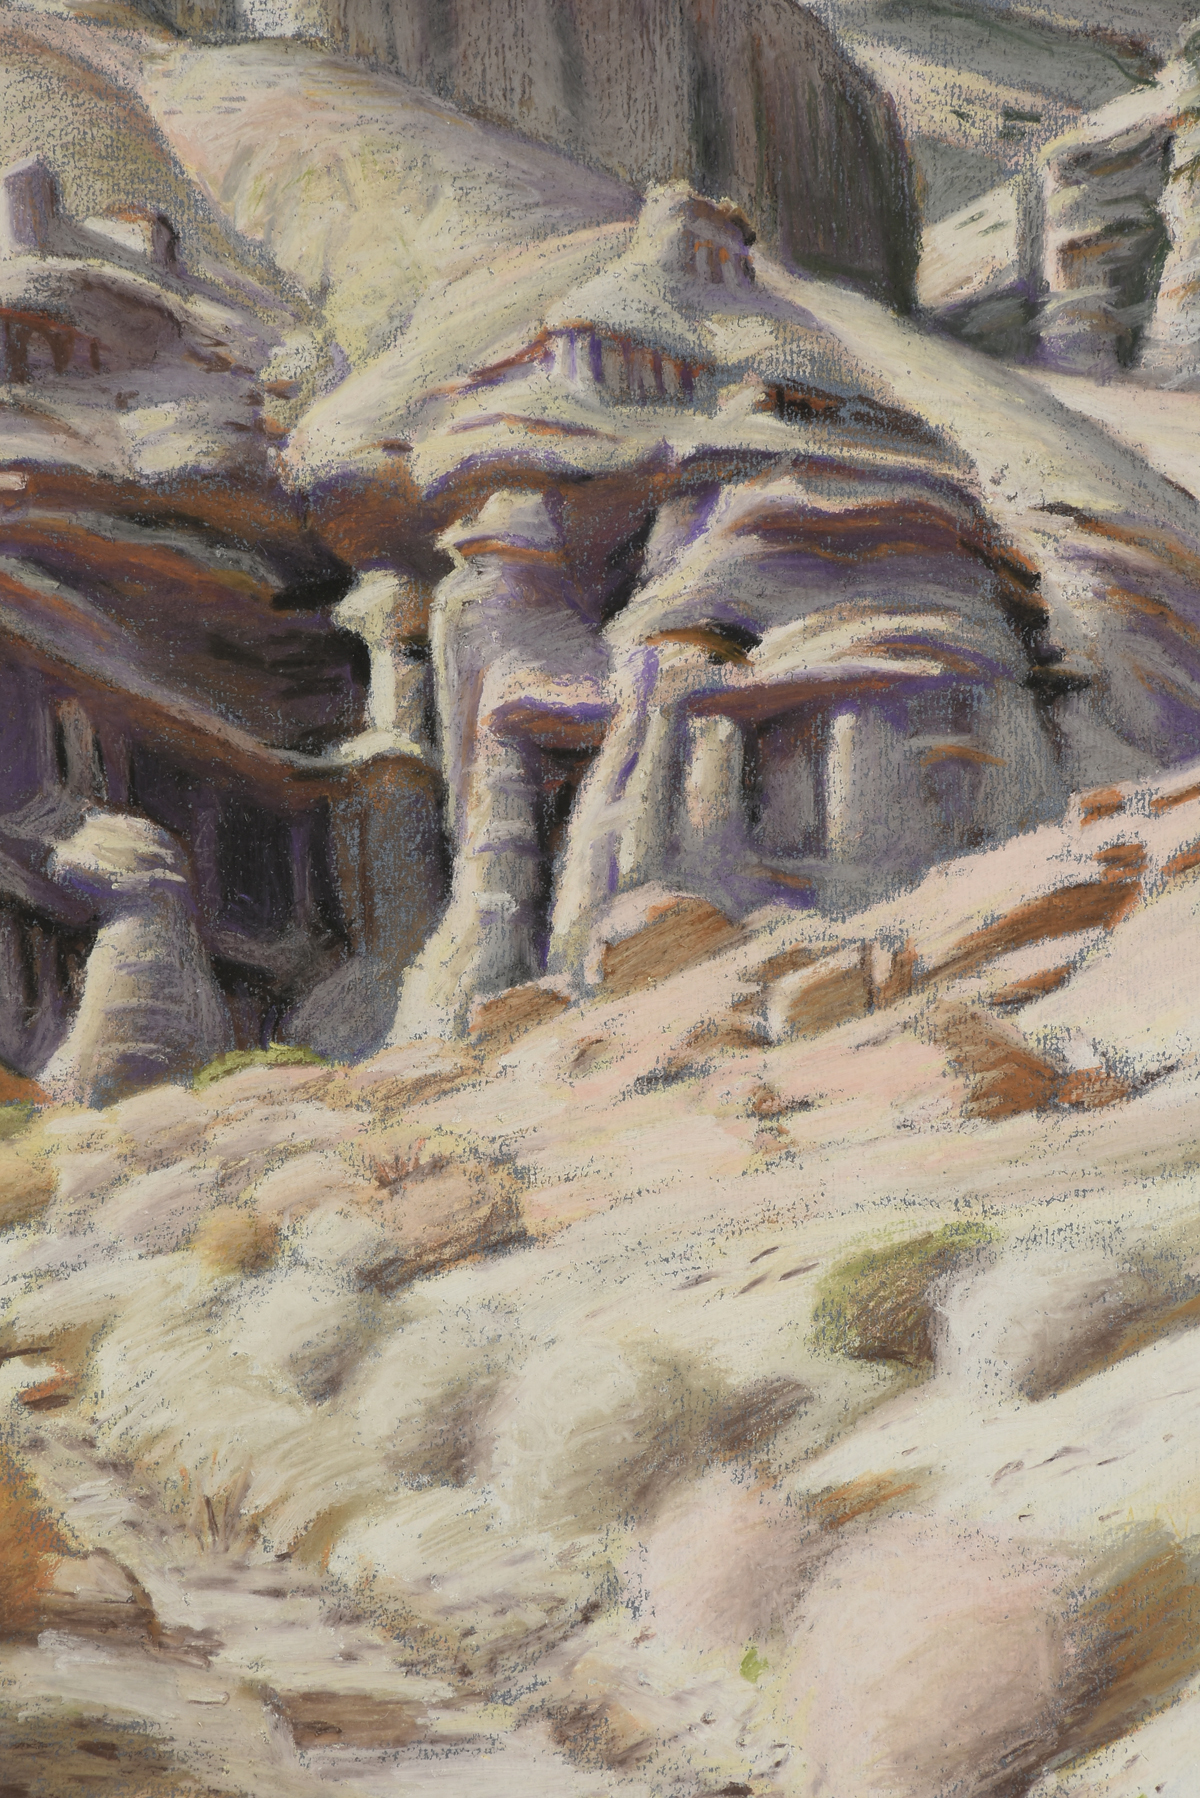 attributed to JAMES DOOLIN (American 1932-2002) A DRAWING, "Desert Dwellers," pastel on paper. 25" x - Image 7 of 11